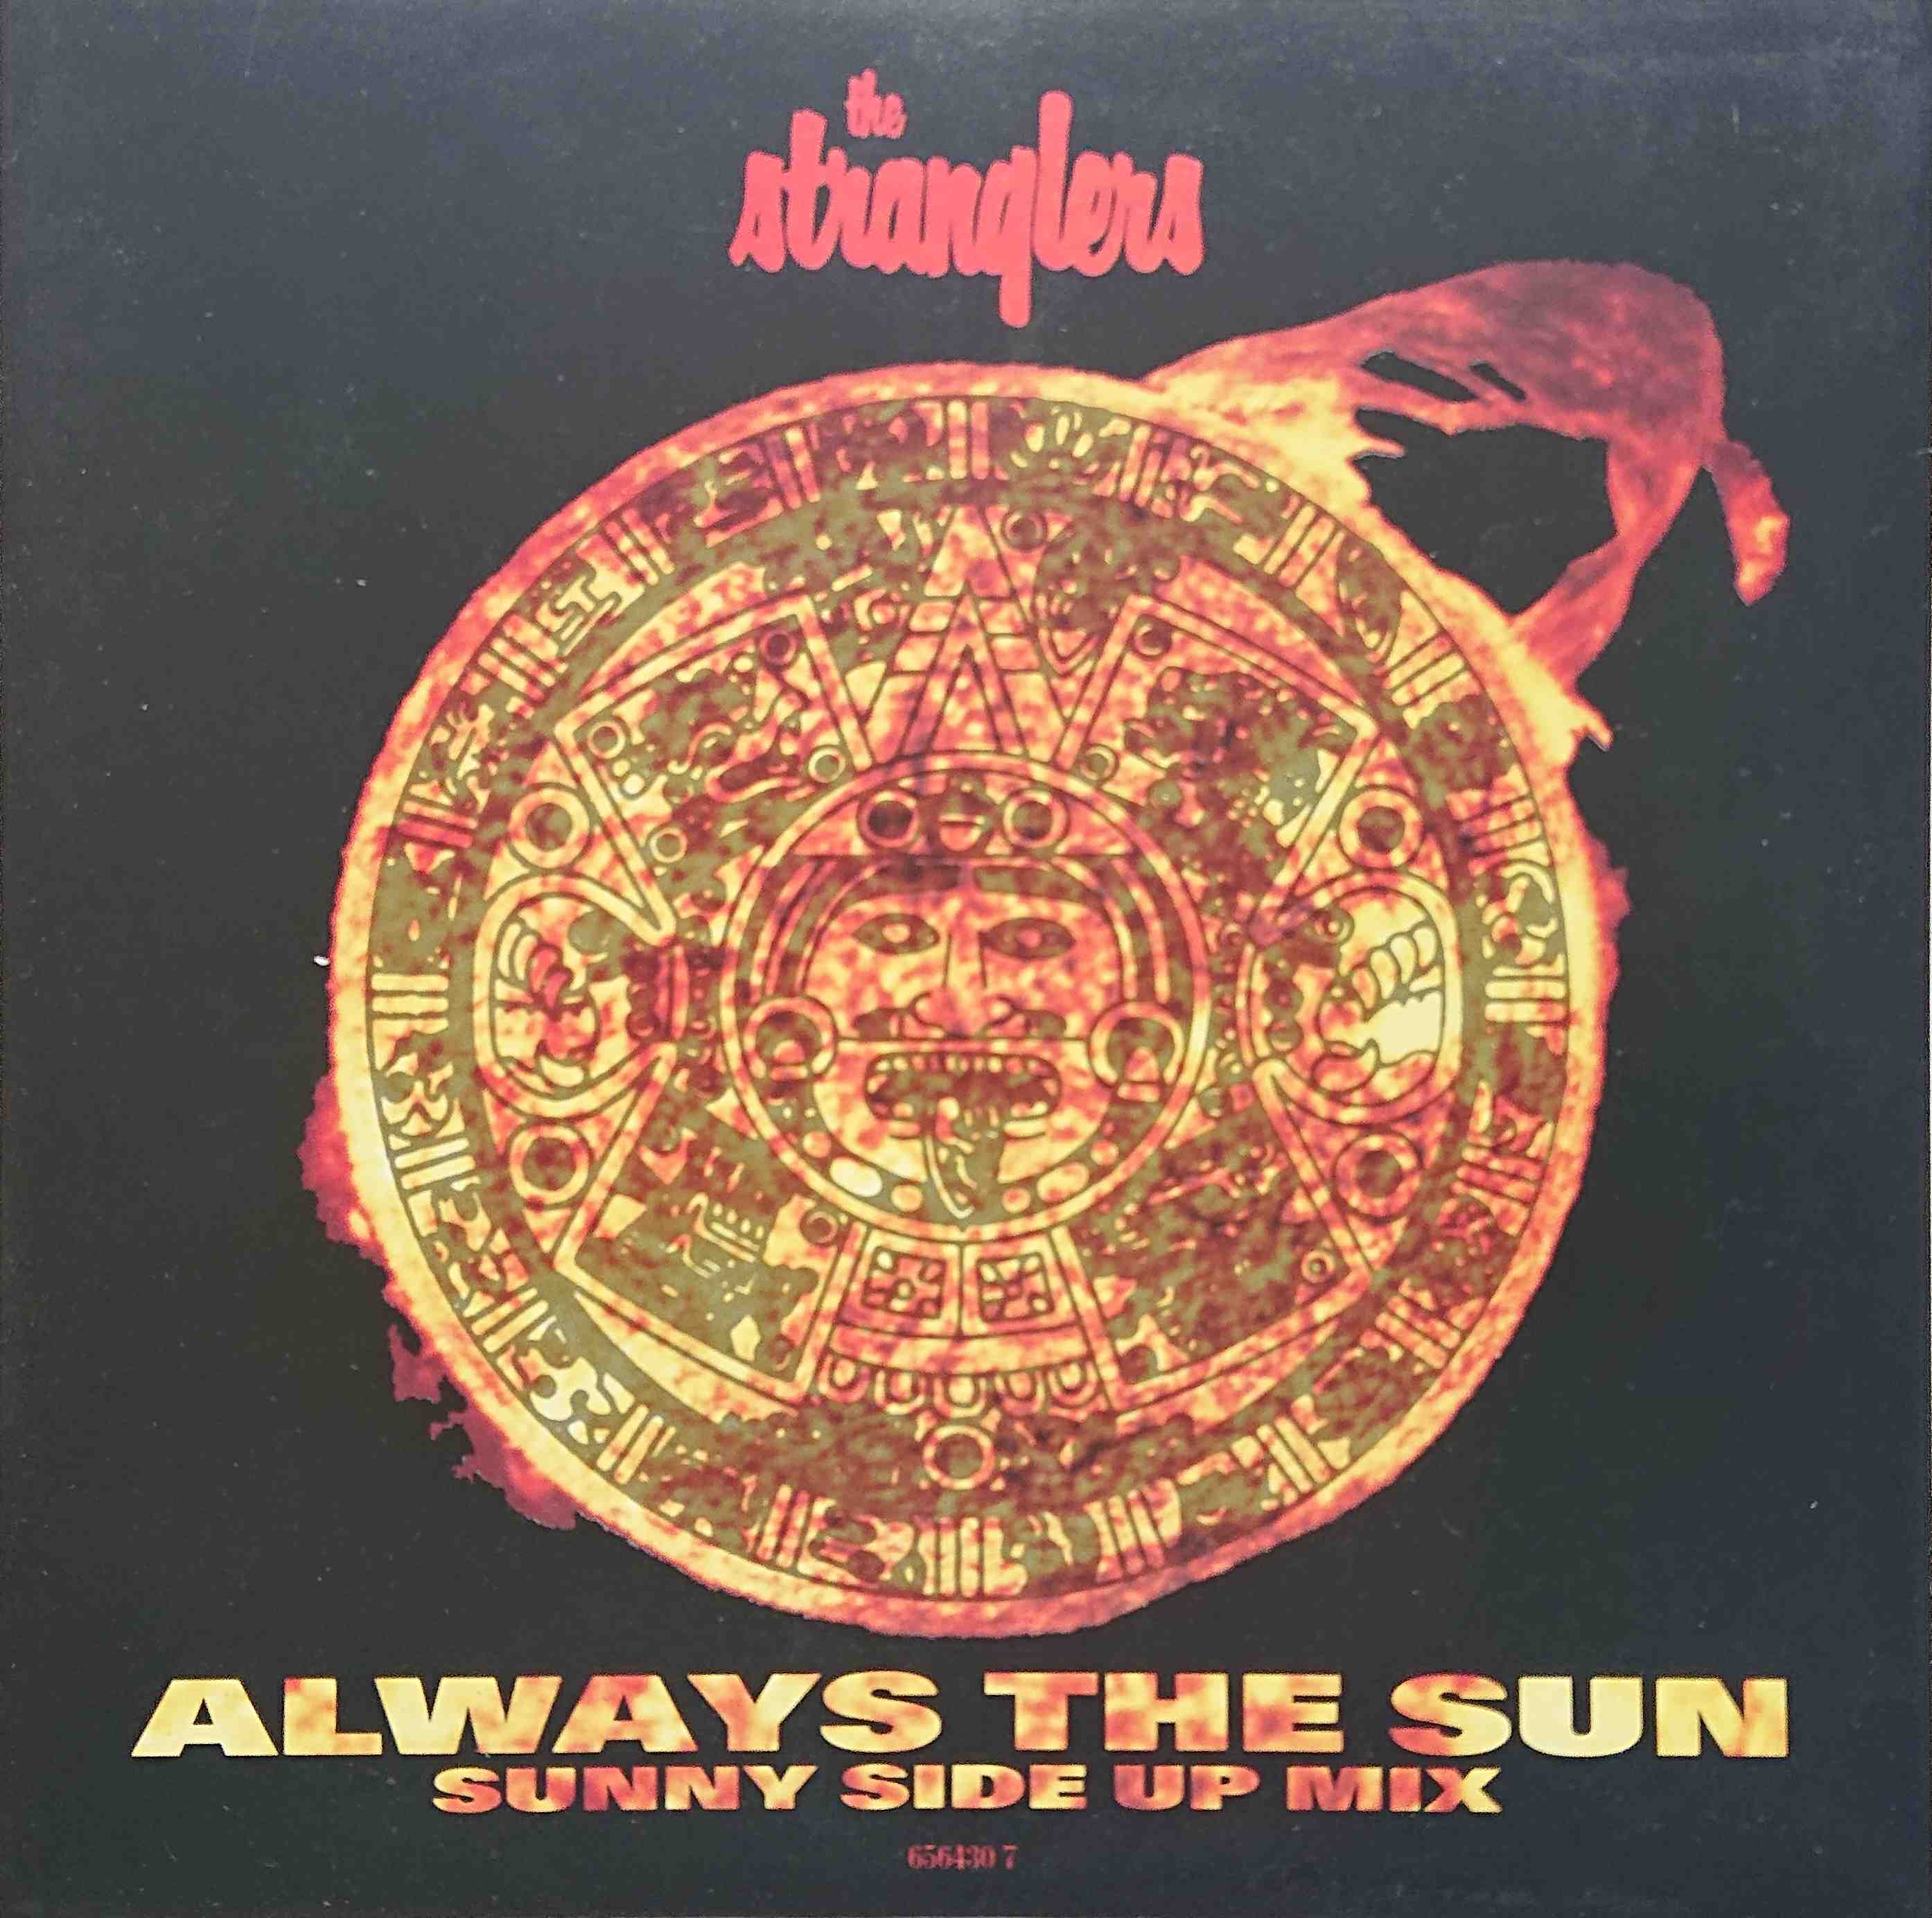 Picture of Always the Sun (Sunny side up mix) by artist The Stranglers  from The Stranglers singles